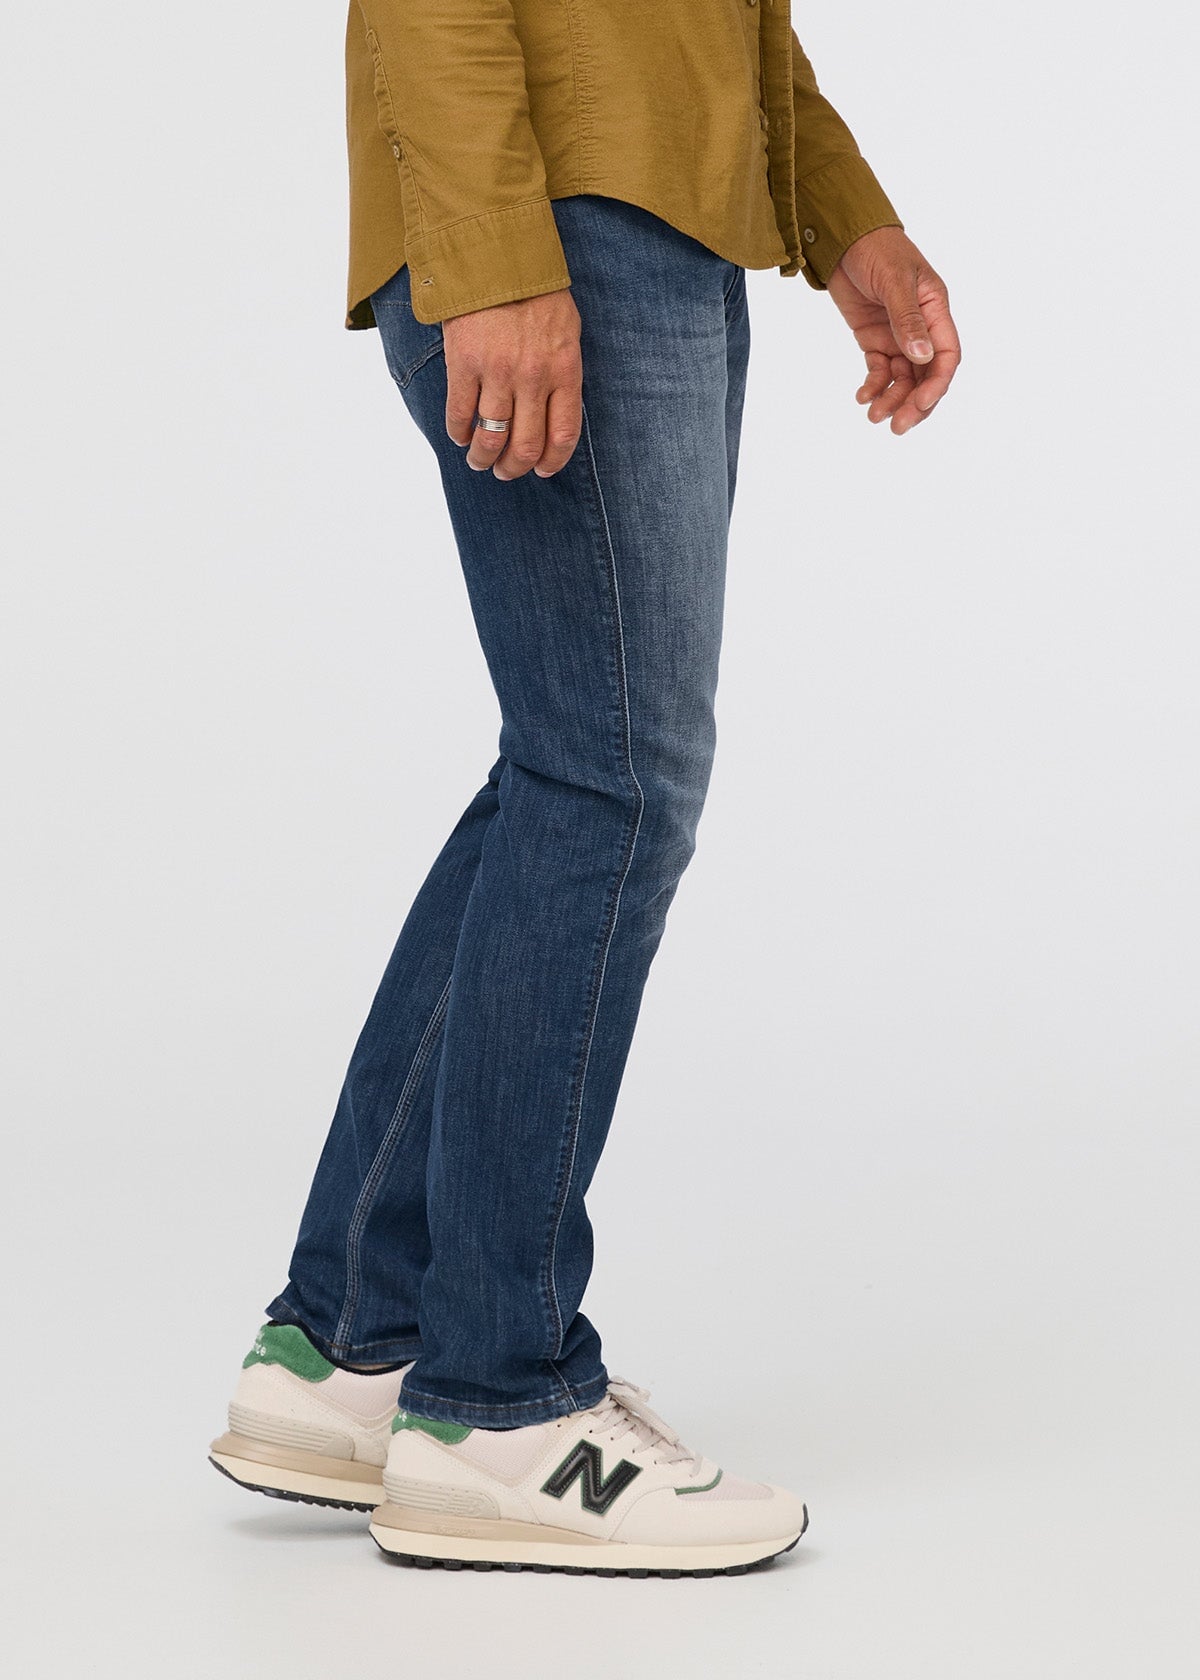 Men's Relaxed Fit Stretch Jeans